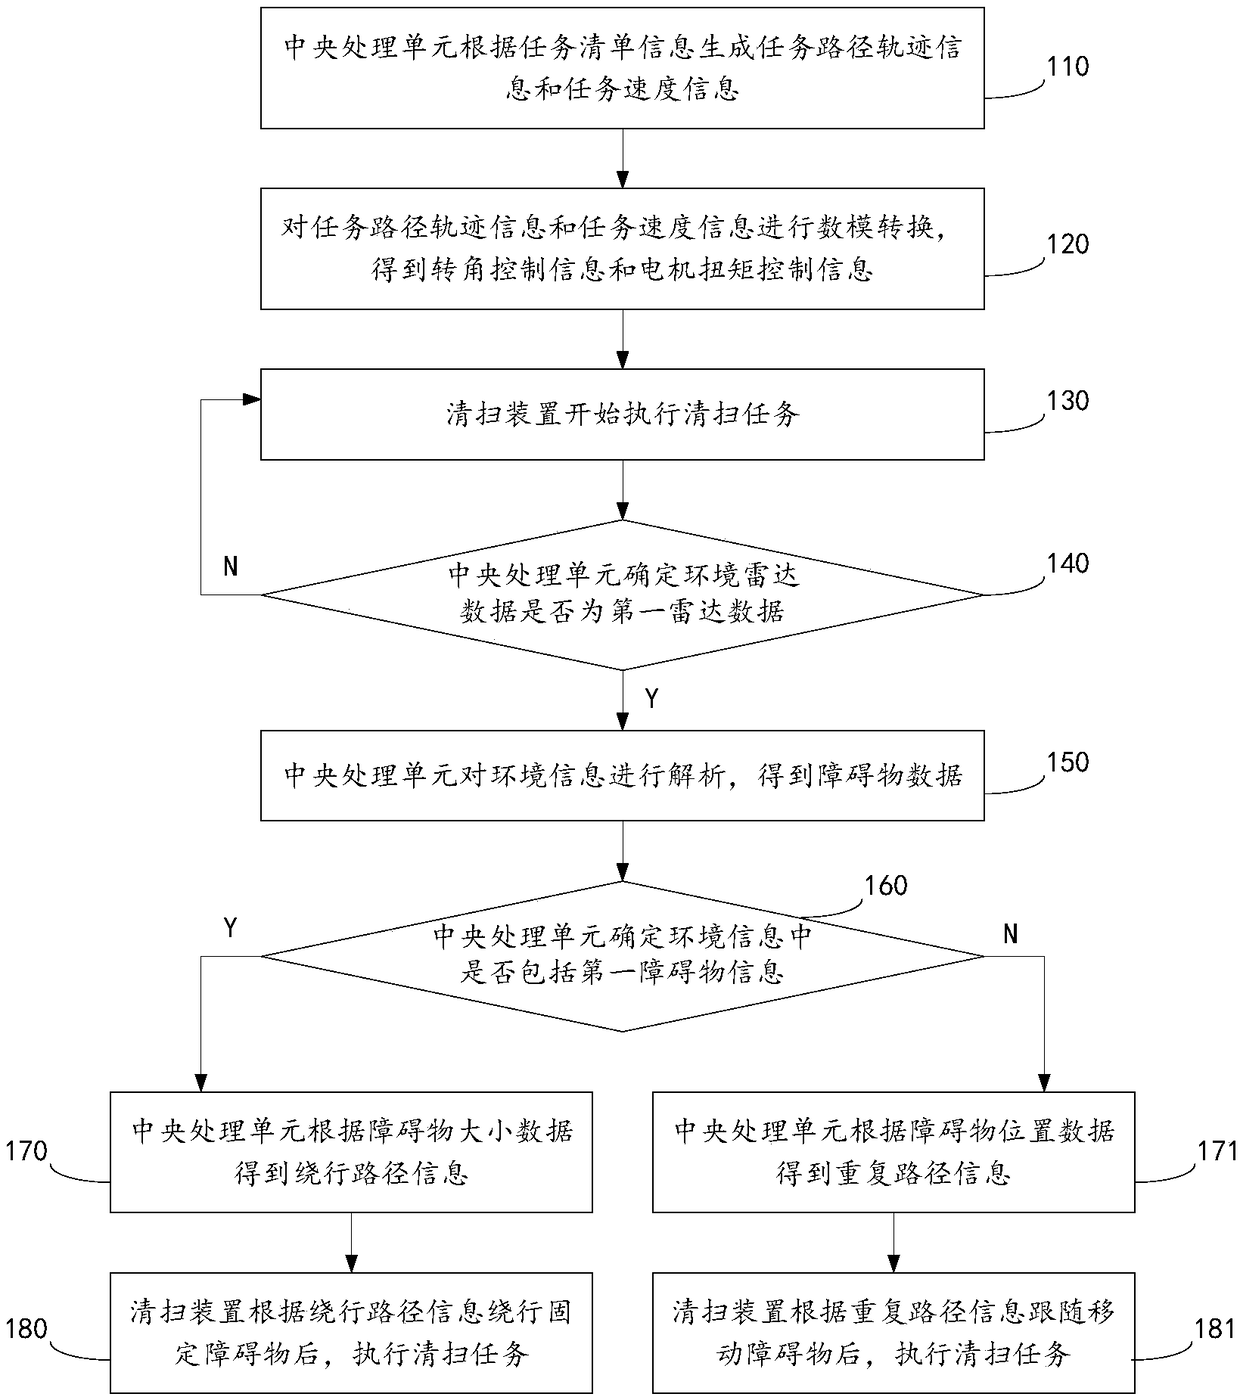 Obstacle recognition and avoidance method